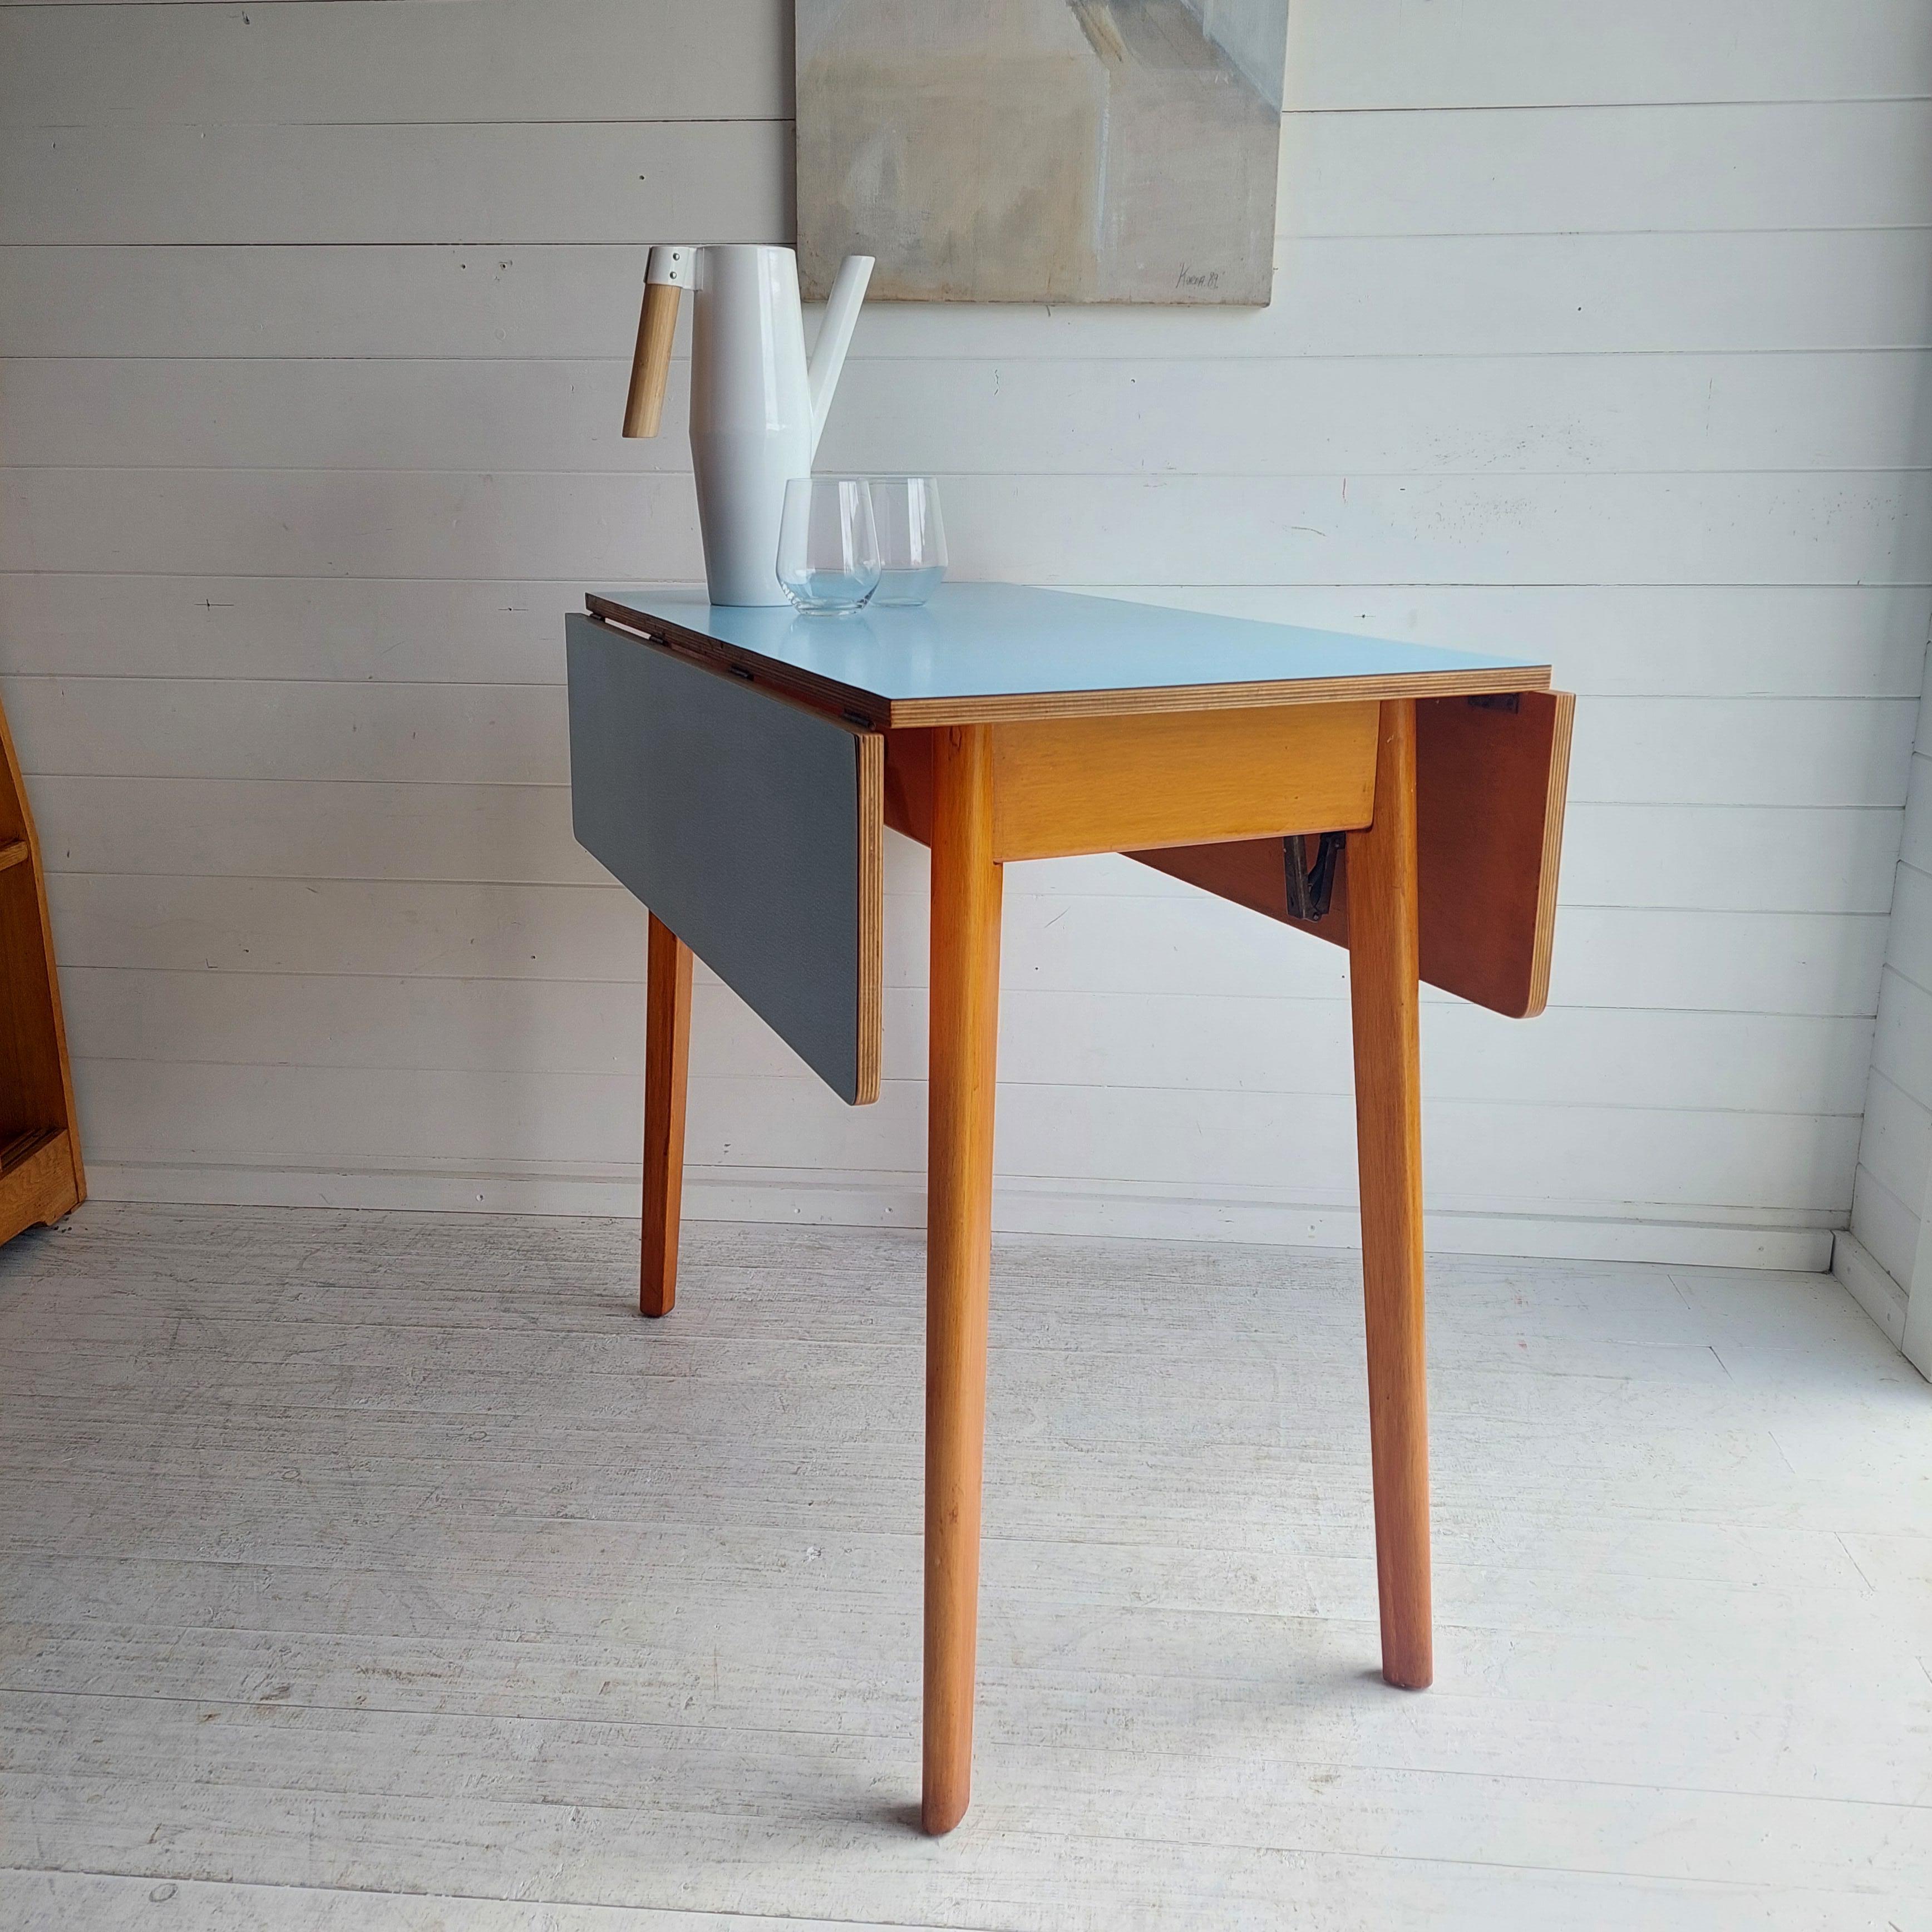 Mid-Century Modern Mid Century Blue Formica Drop Leaf Kitchen Dining Table With Wooden Legs 60s For Sale